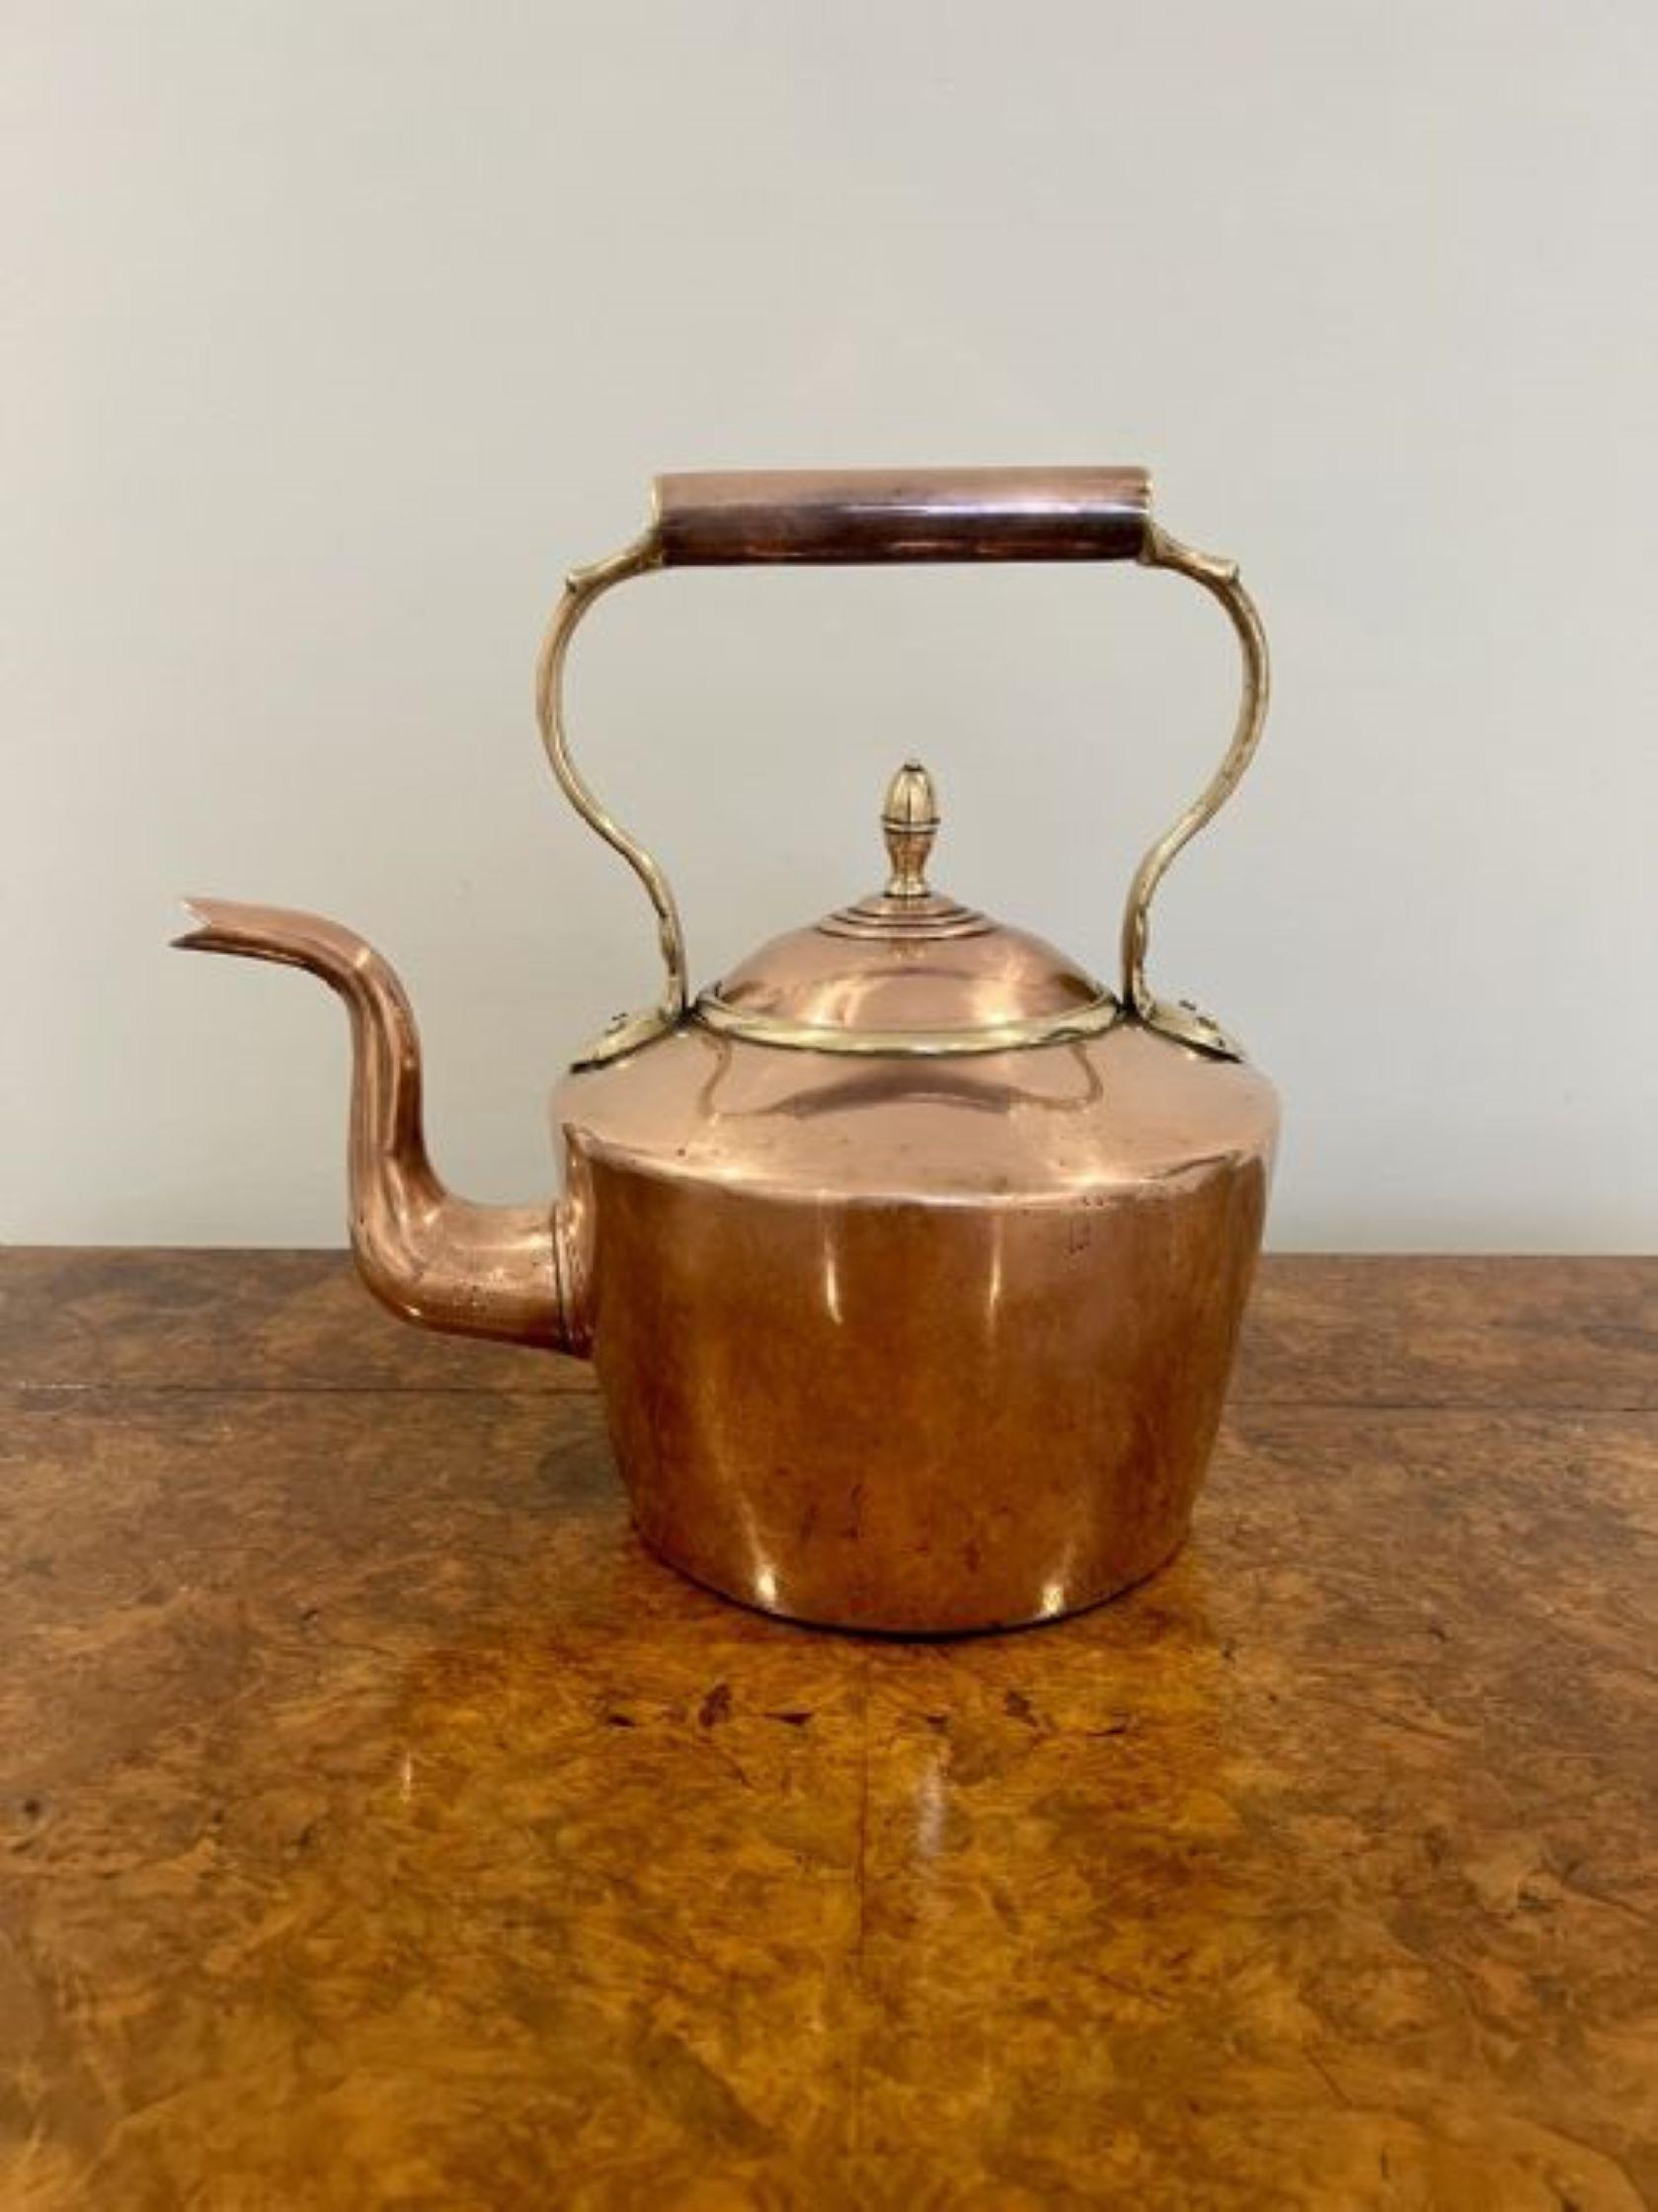 Large antique George III copper kettle having a shaped handle and spout, lift off lid with the original original brass knob.